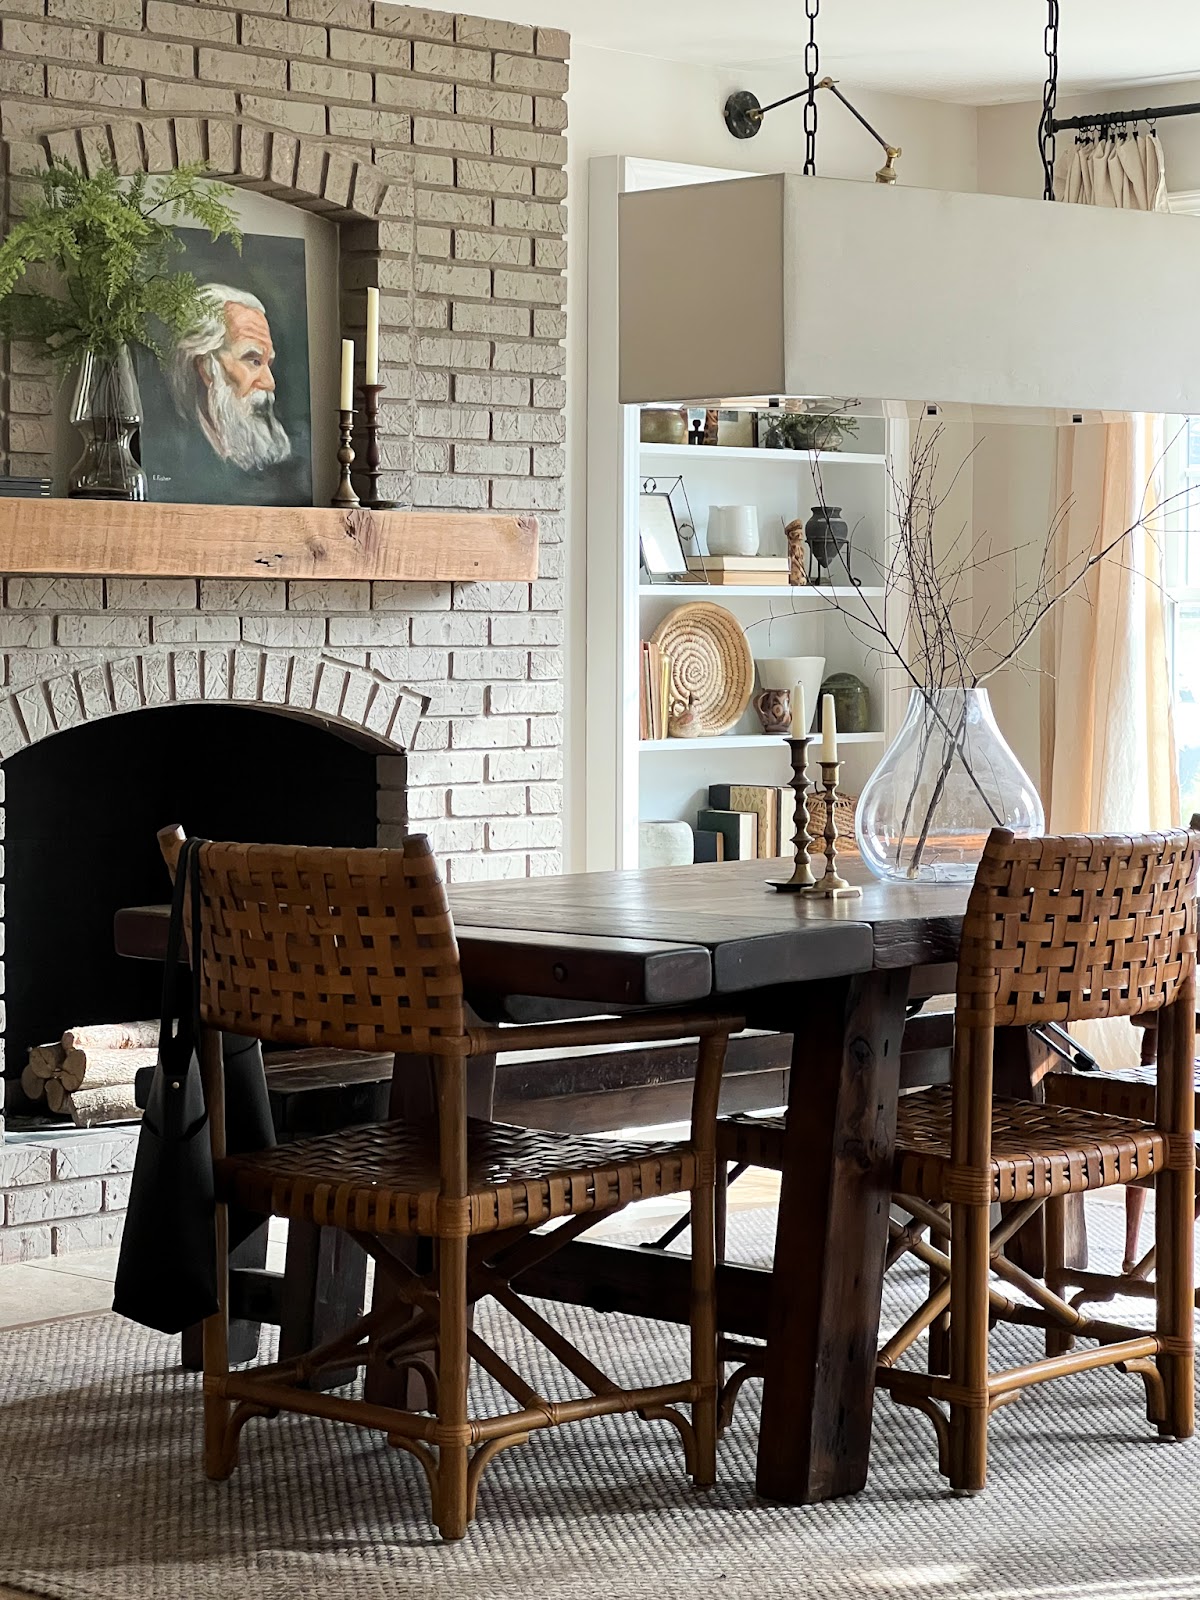 Inspiration to get an earthy, rustic yet refined dining room decor